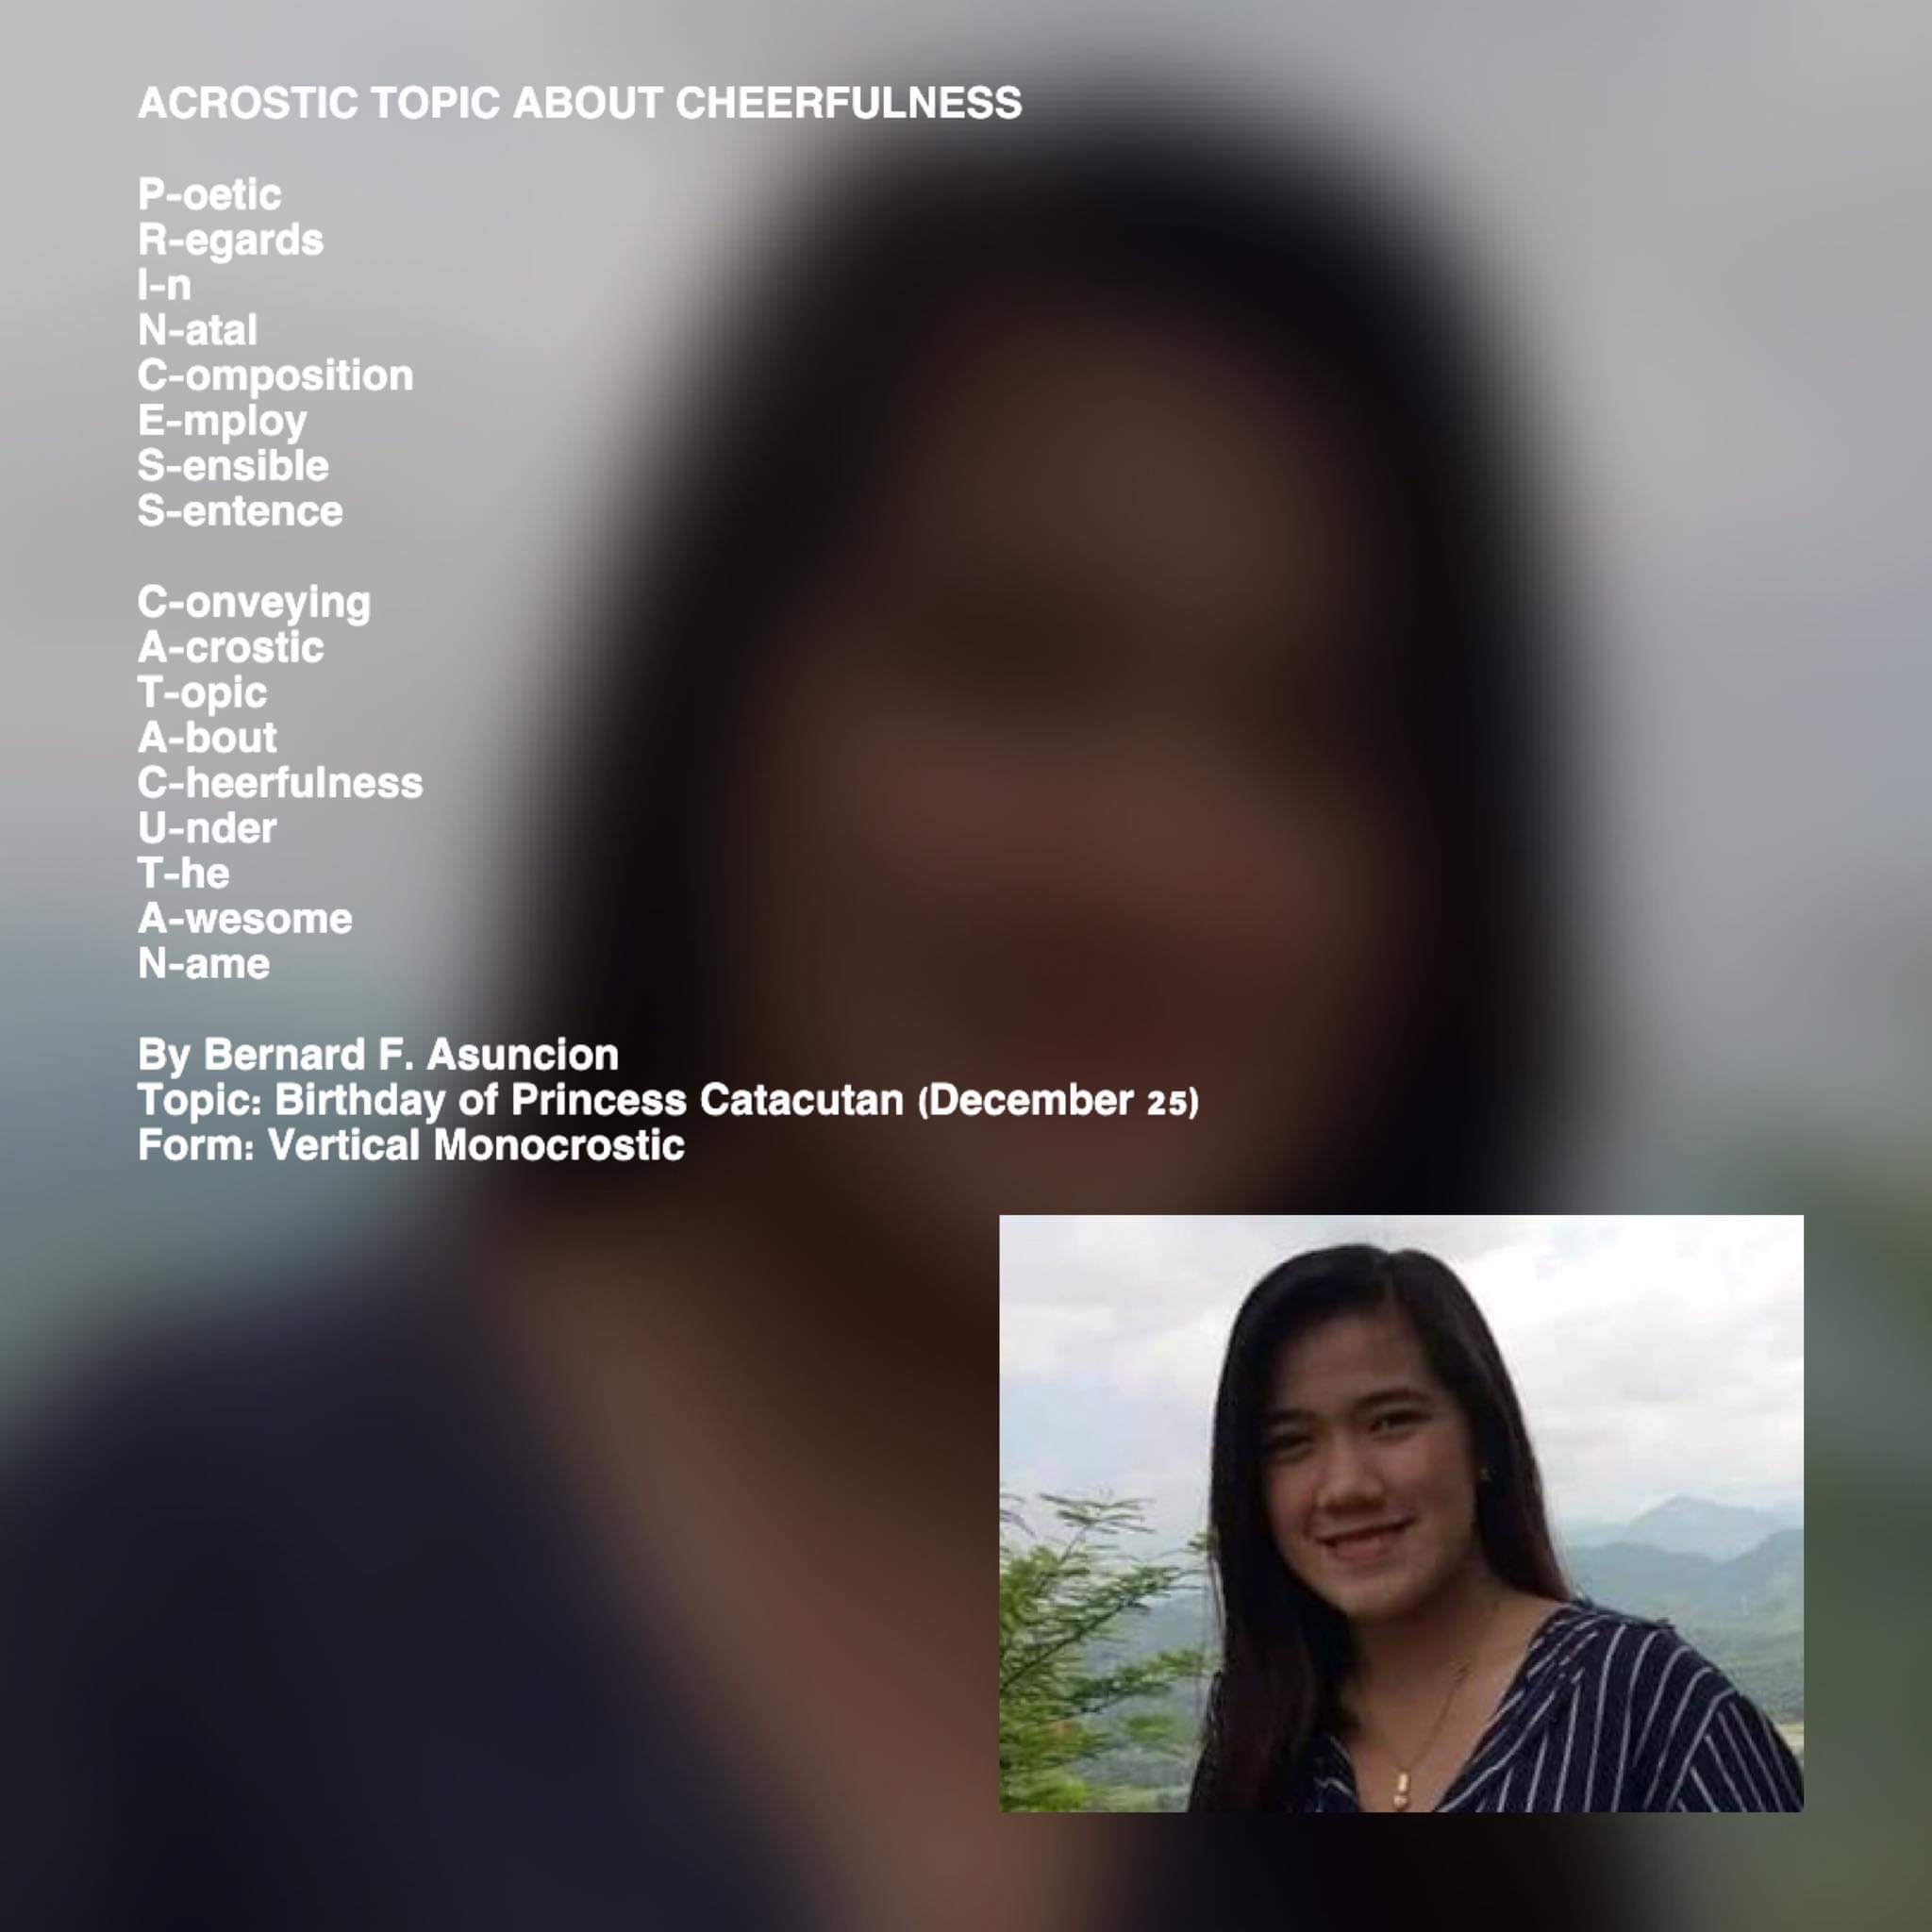 Acrostic Topic About Cheerfulness